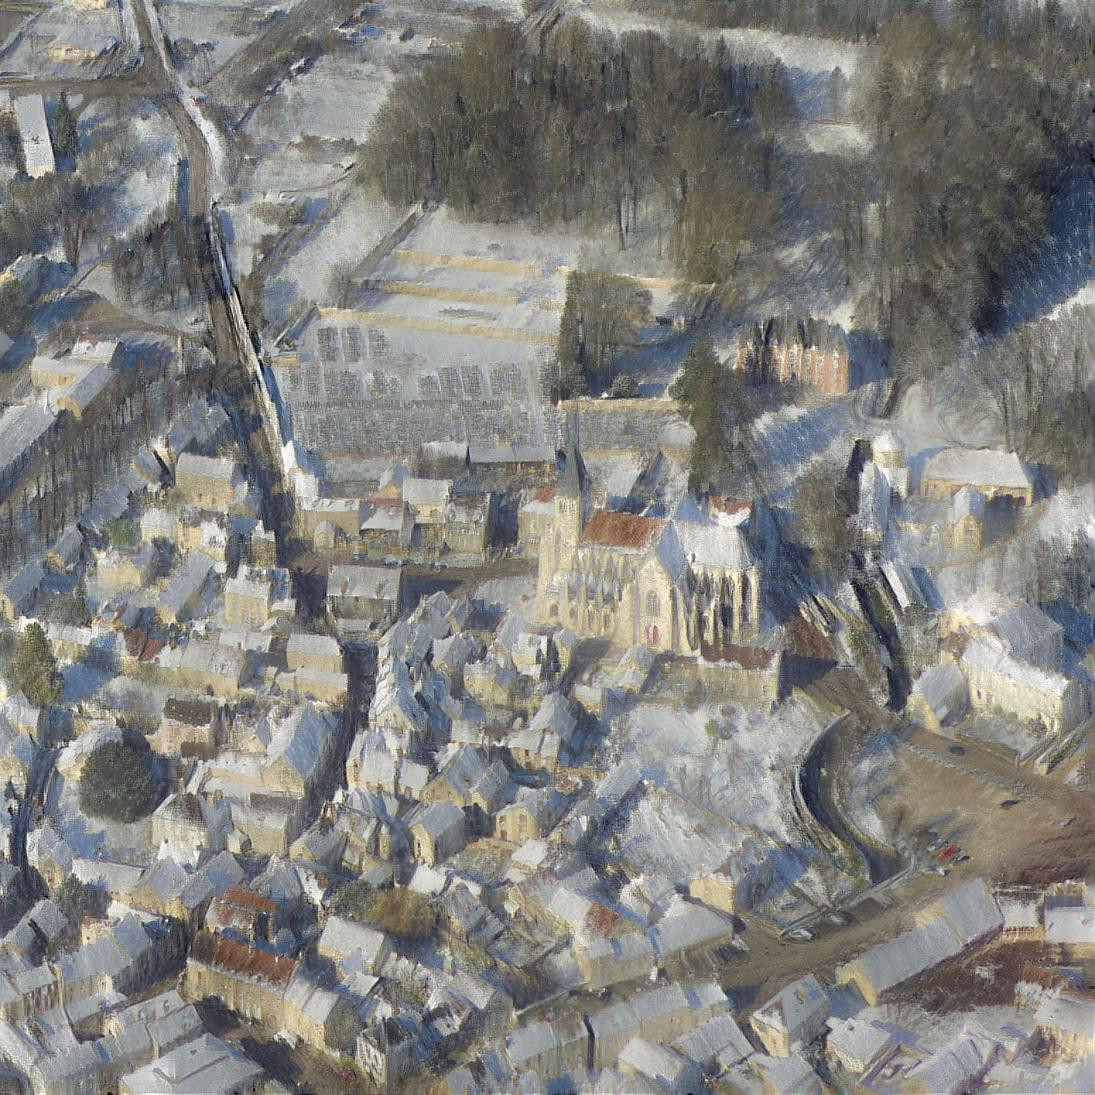 Snowy village from the sky